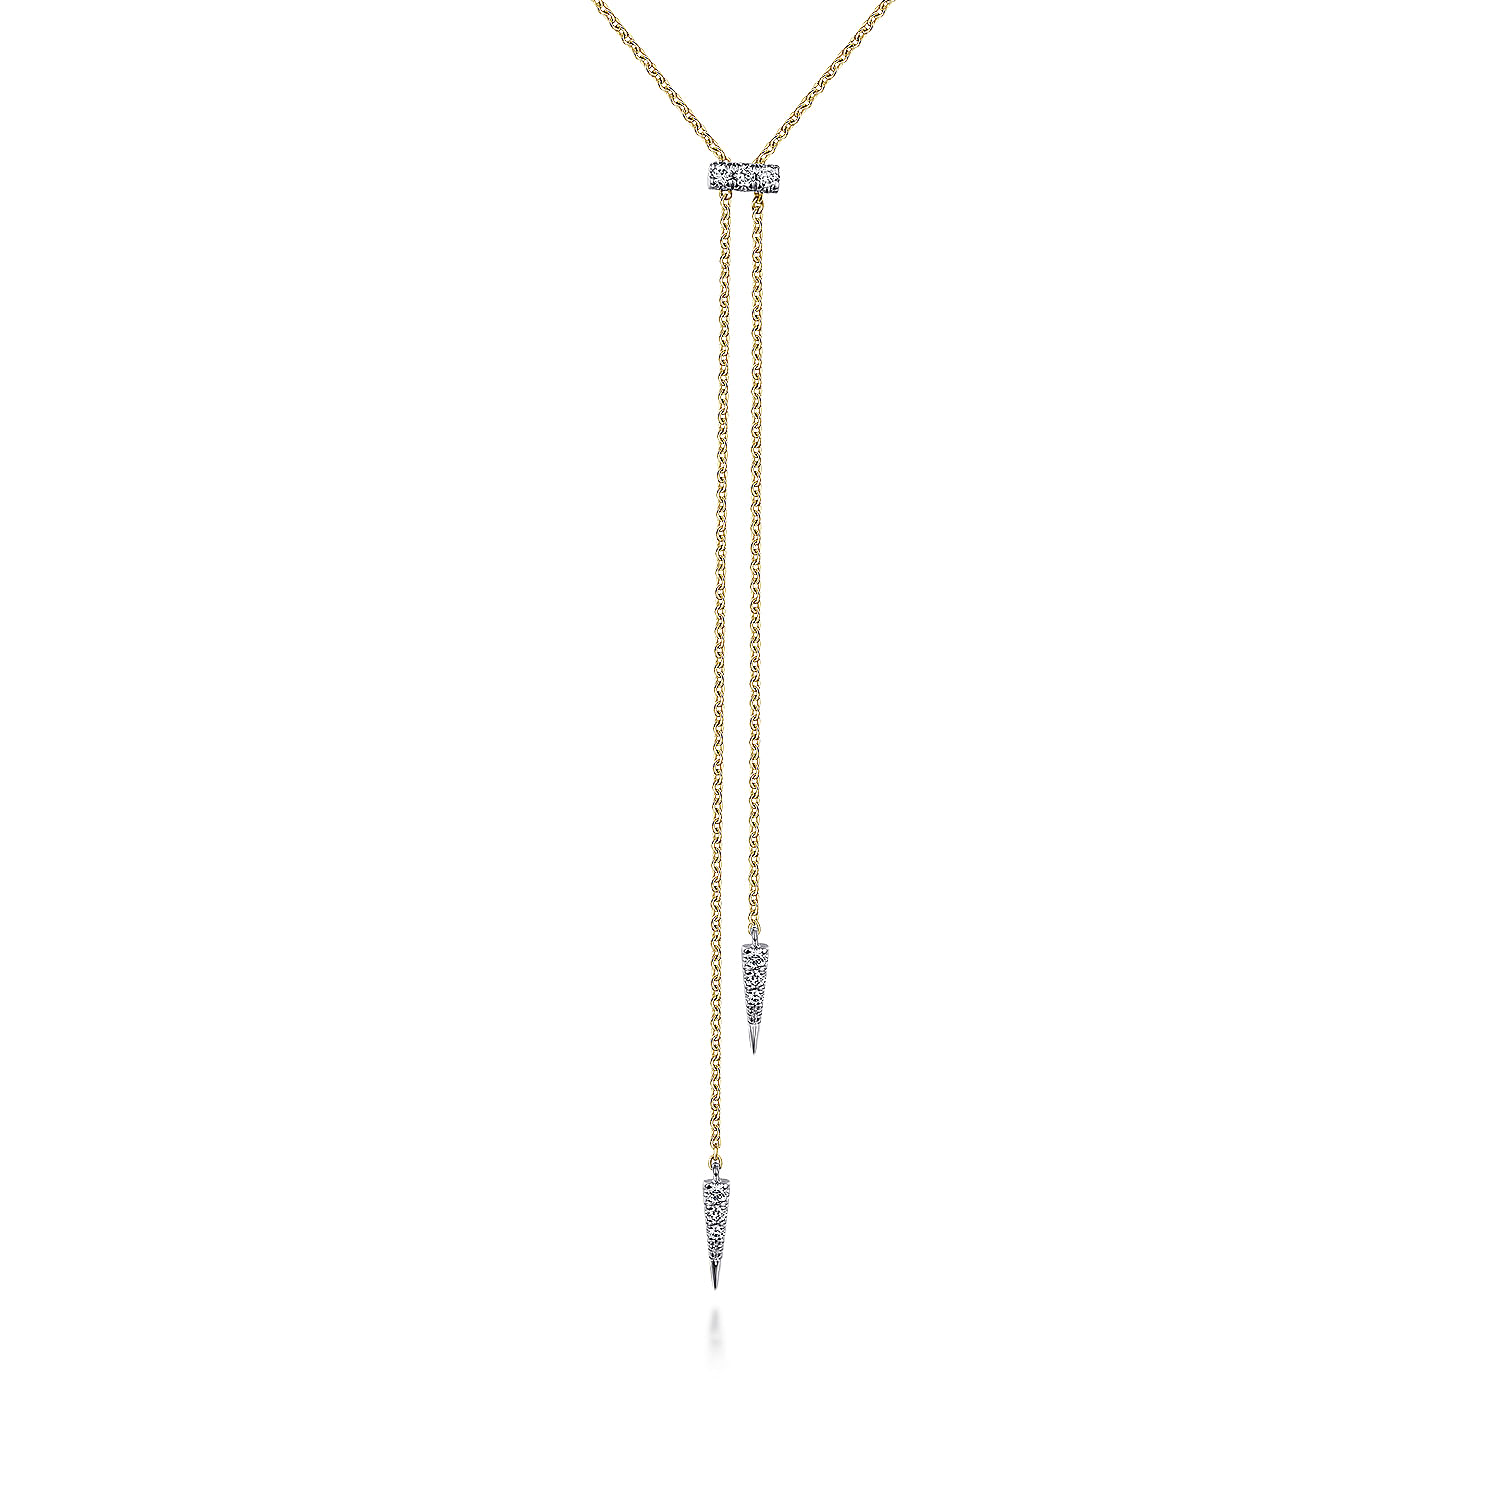 Gabriel - 14K Yellow-White Gold Lariat Choker Necklace with Diamond Bar and Spikes